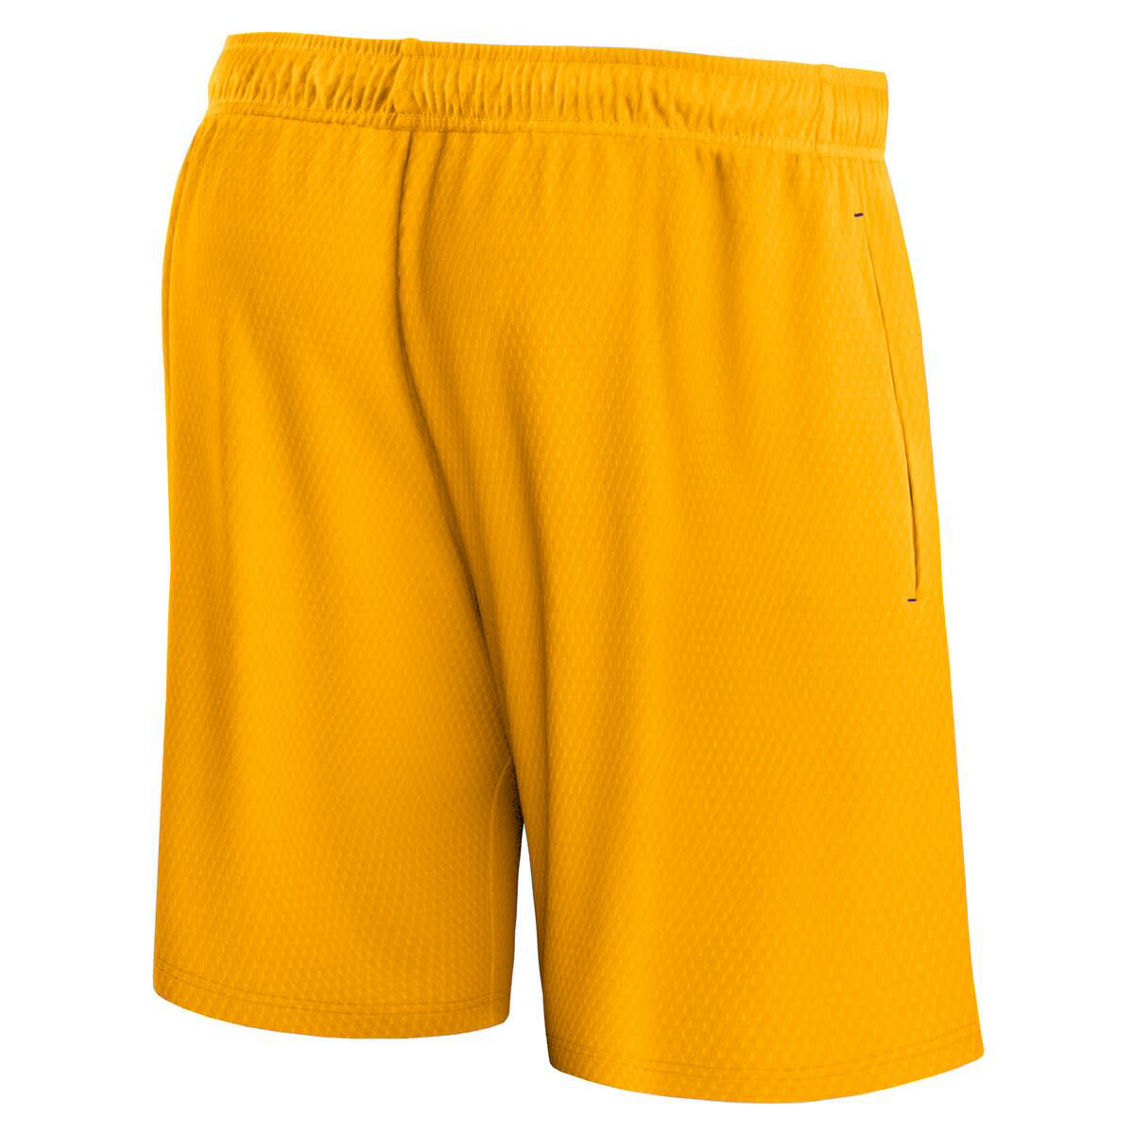 Fanatics Branded Men's Gold Los Angeles Lakers Up Mesh Shorts - Image 4 of 4